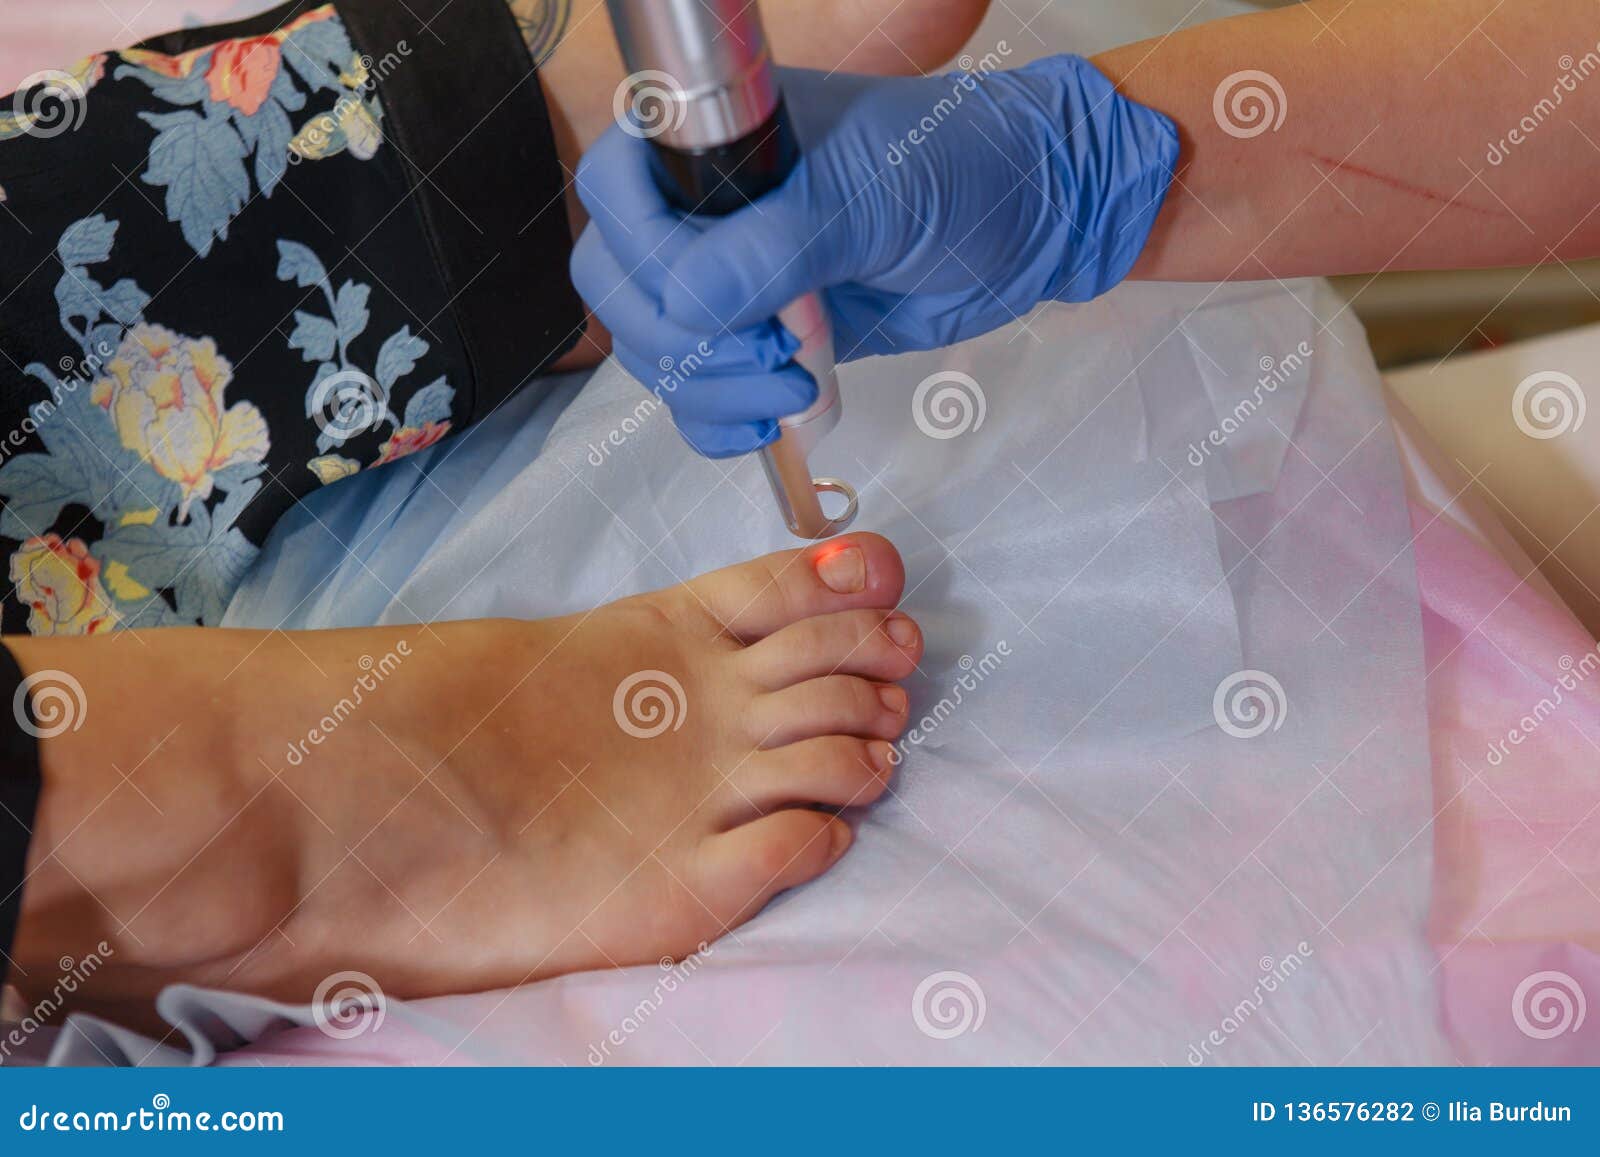 Toenail Fungus Treatment With Foot Laser At Laser Nail Therapy Stock Photo Image of female